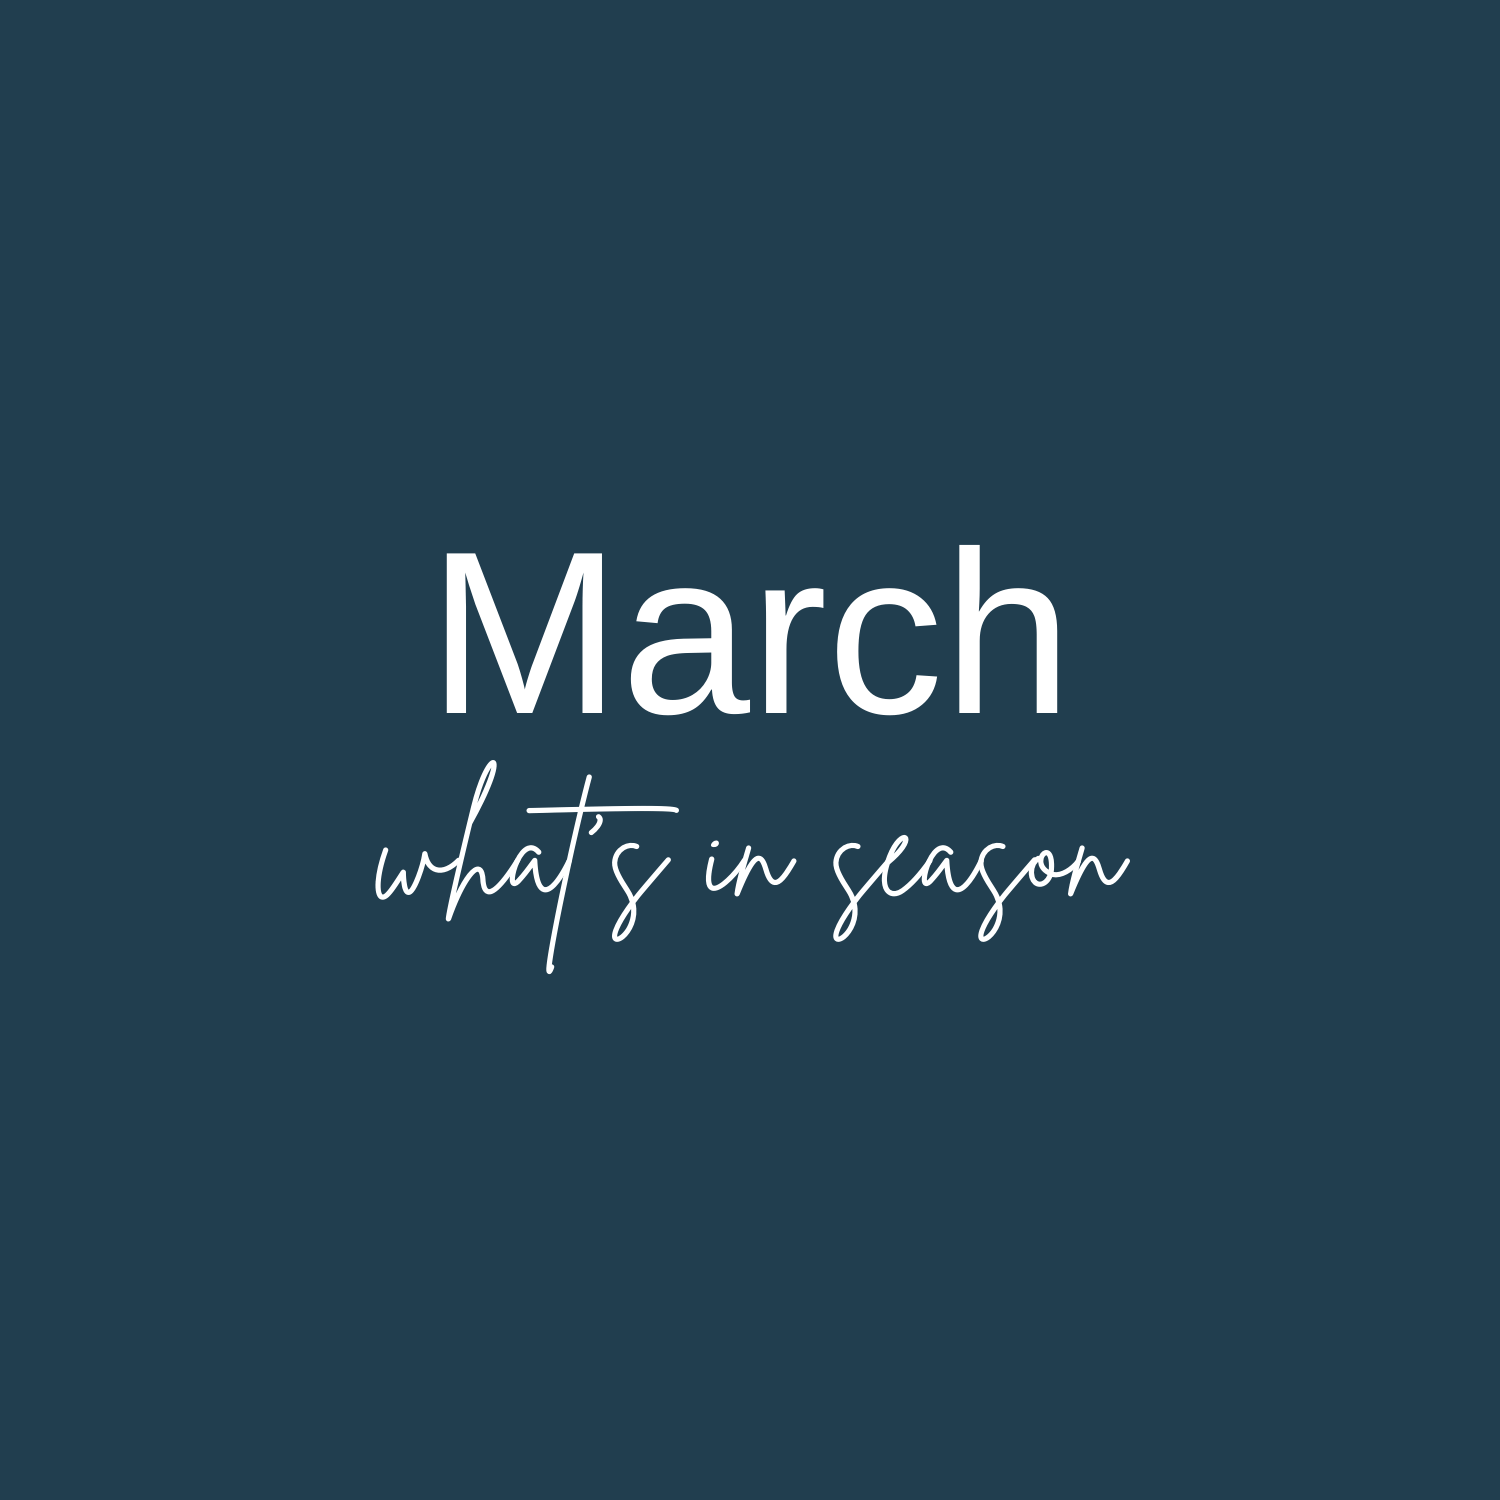 -What’s in Season in March?